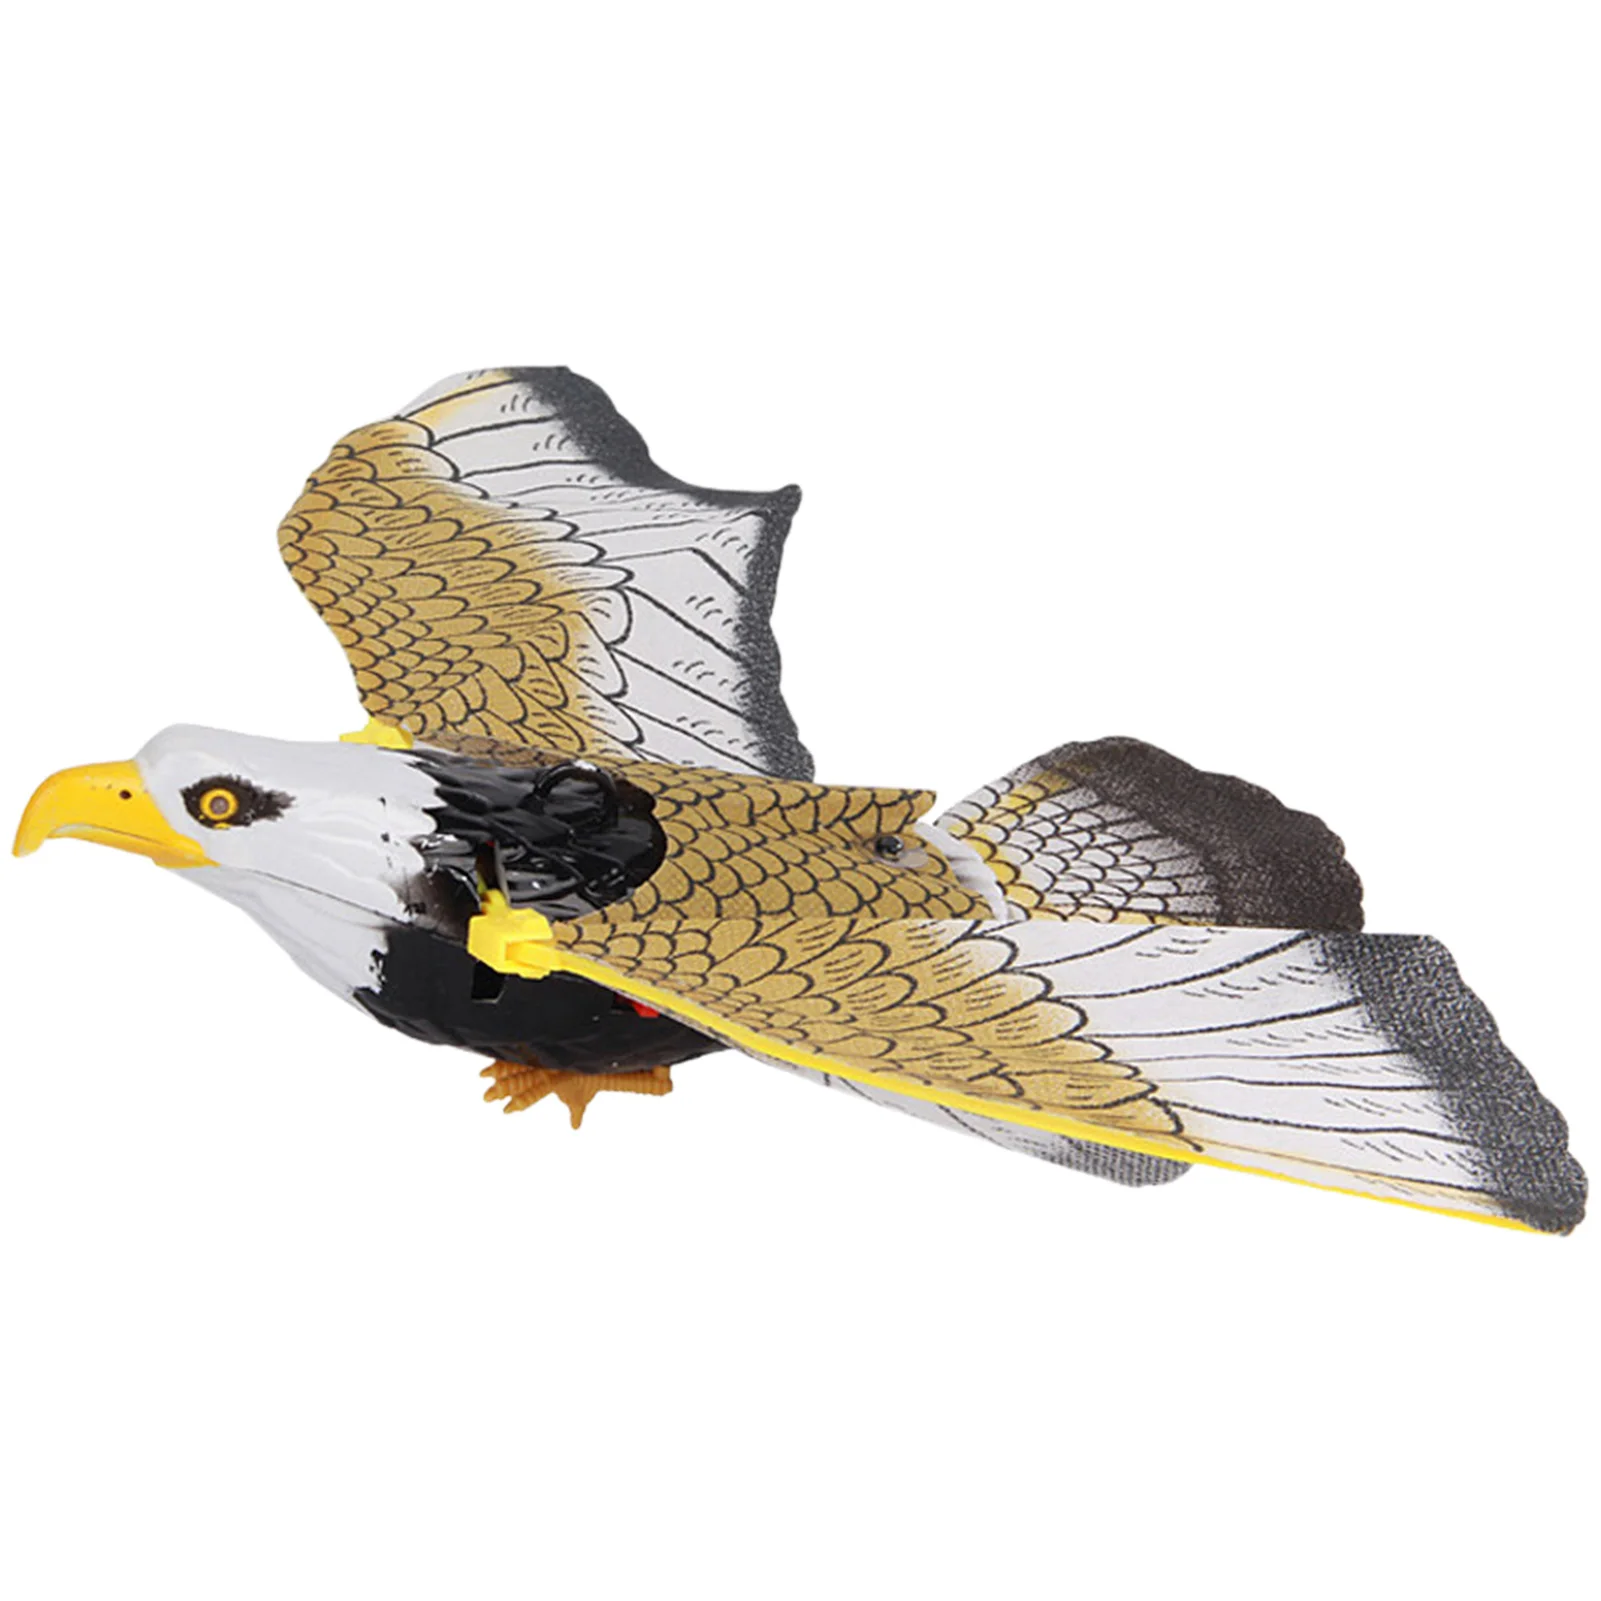 

Electronic Sound Bird Cat Toy Flying Eagle/Parrot Shape Sound Toys For Indoor Cats Kittens Interactive Kitten Toys For Cats To